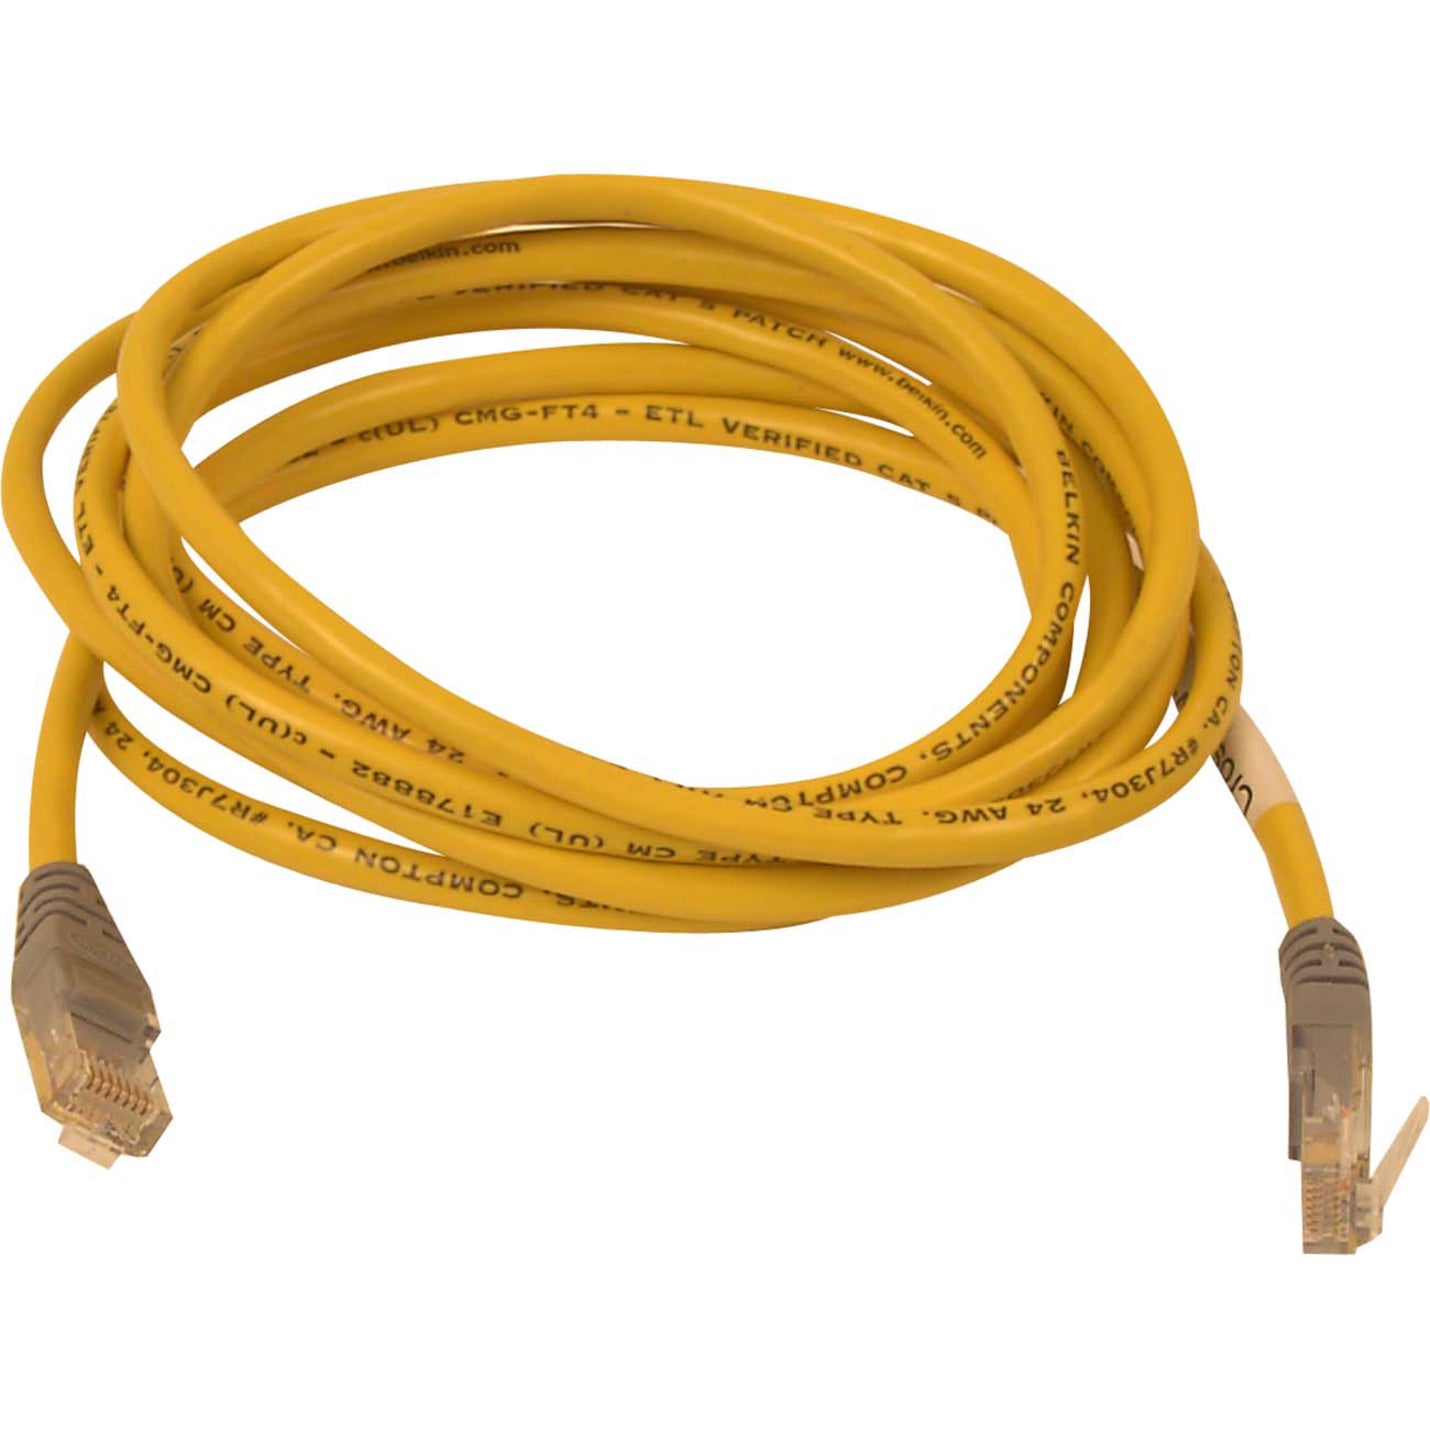 Belkin A3X126-25-YLW-M Cat5e Crossover Cable, 25 ft, Yellow, Lifetime Warranty